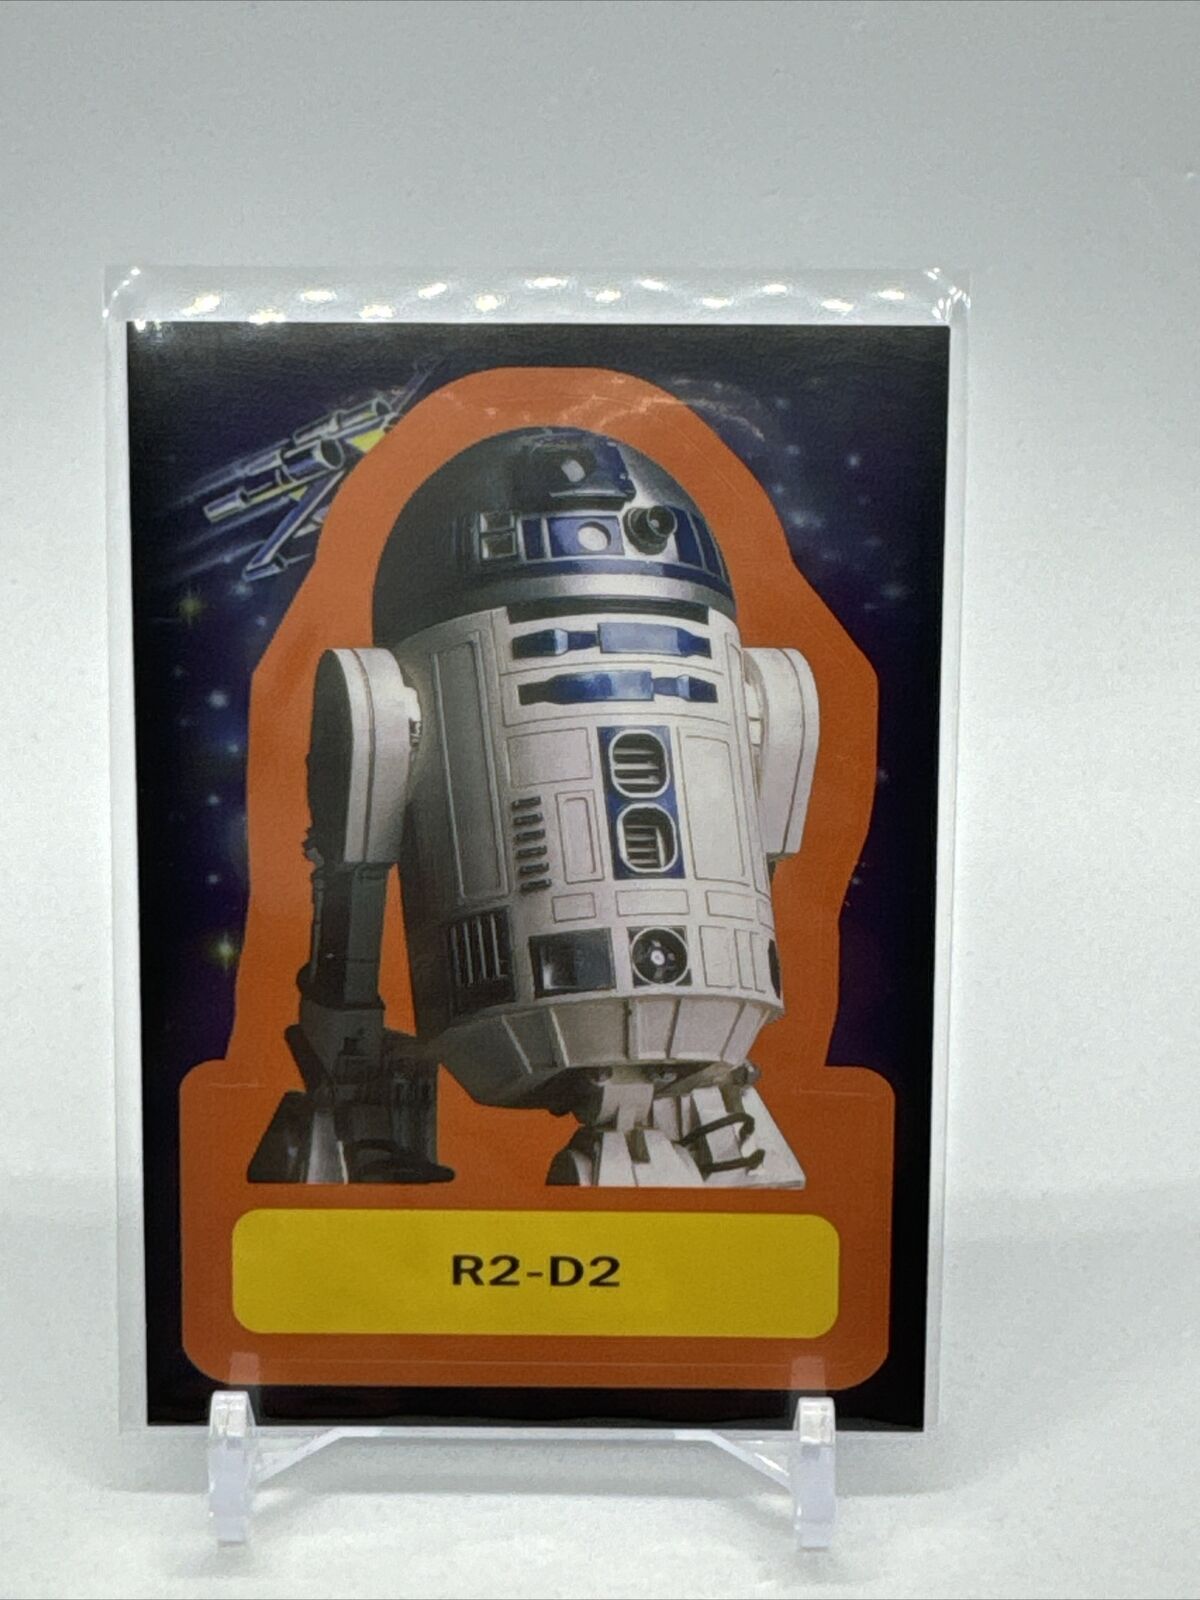 2015 Topps Journey To Star Wars The Force Awakens Sticker Card - R2-D2 S12